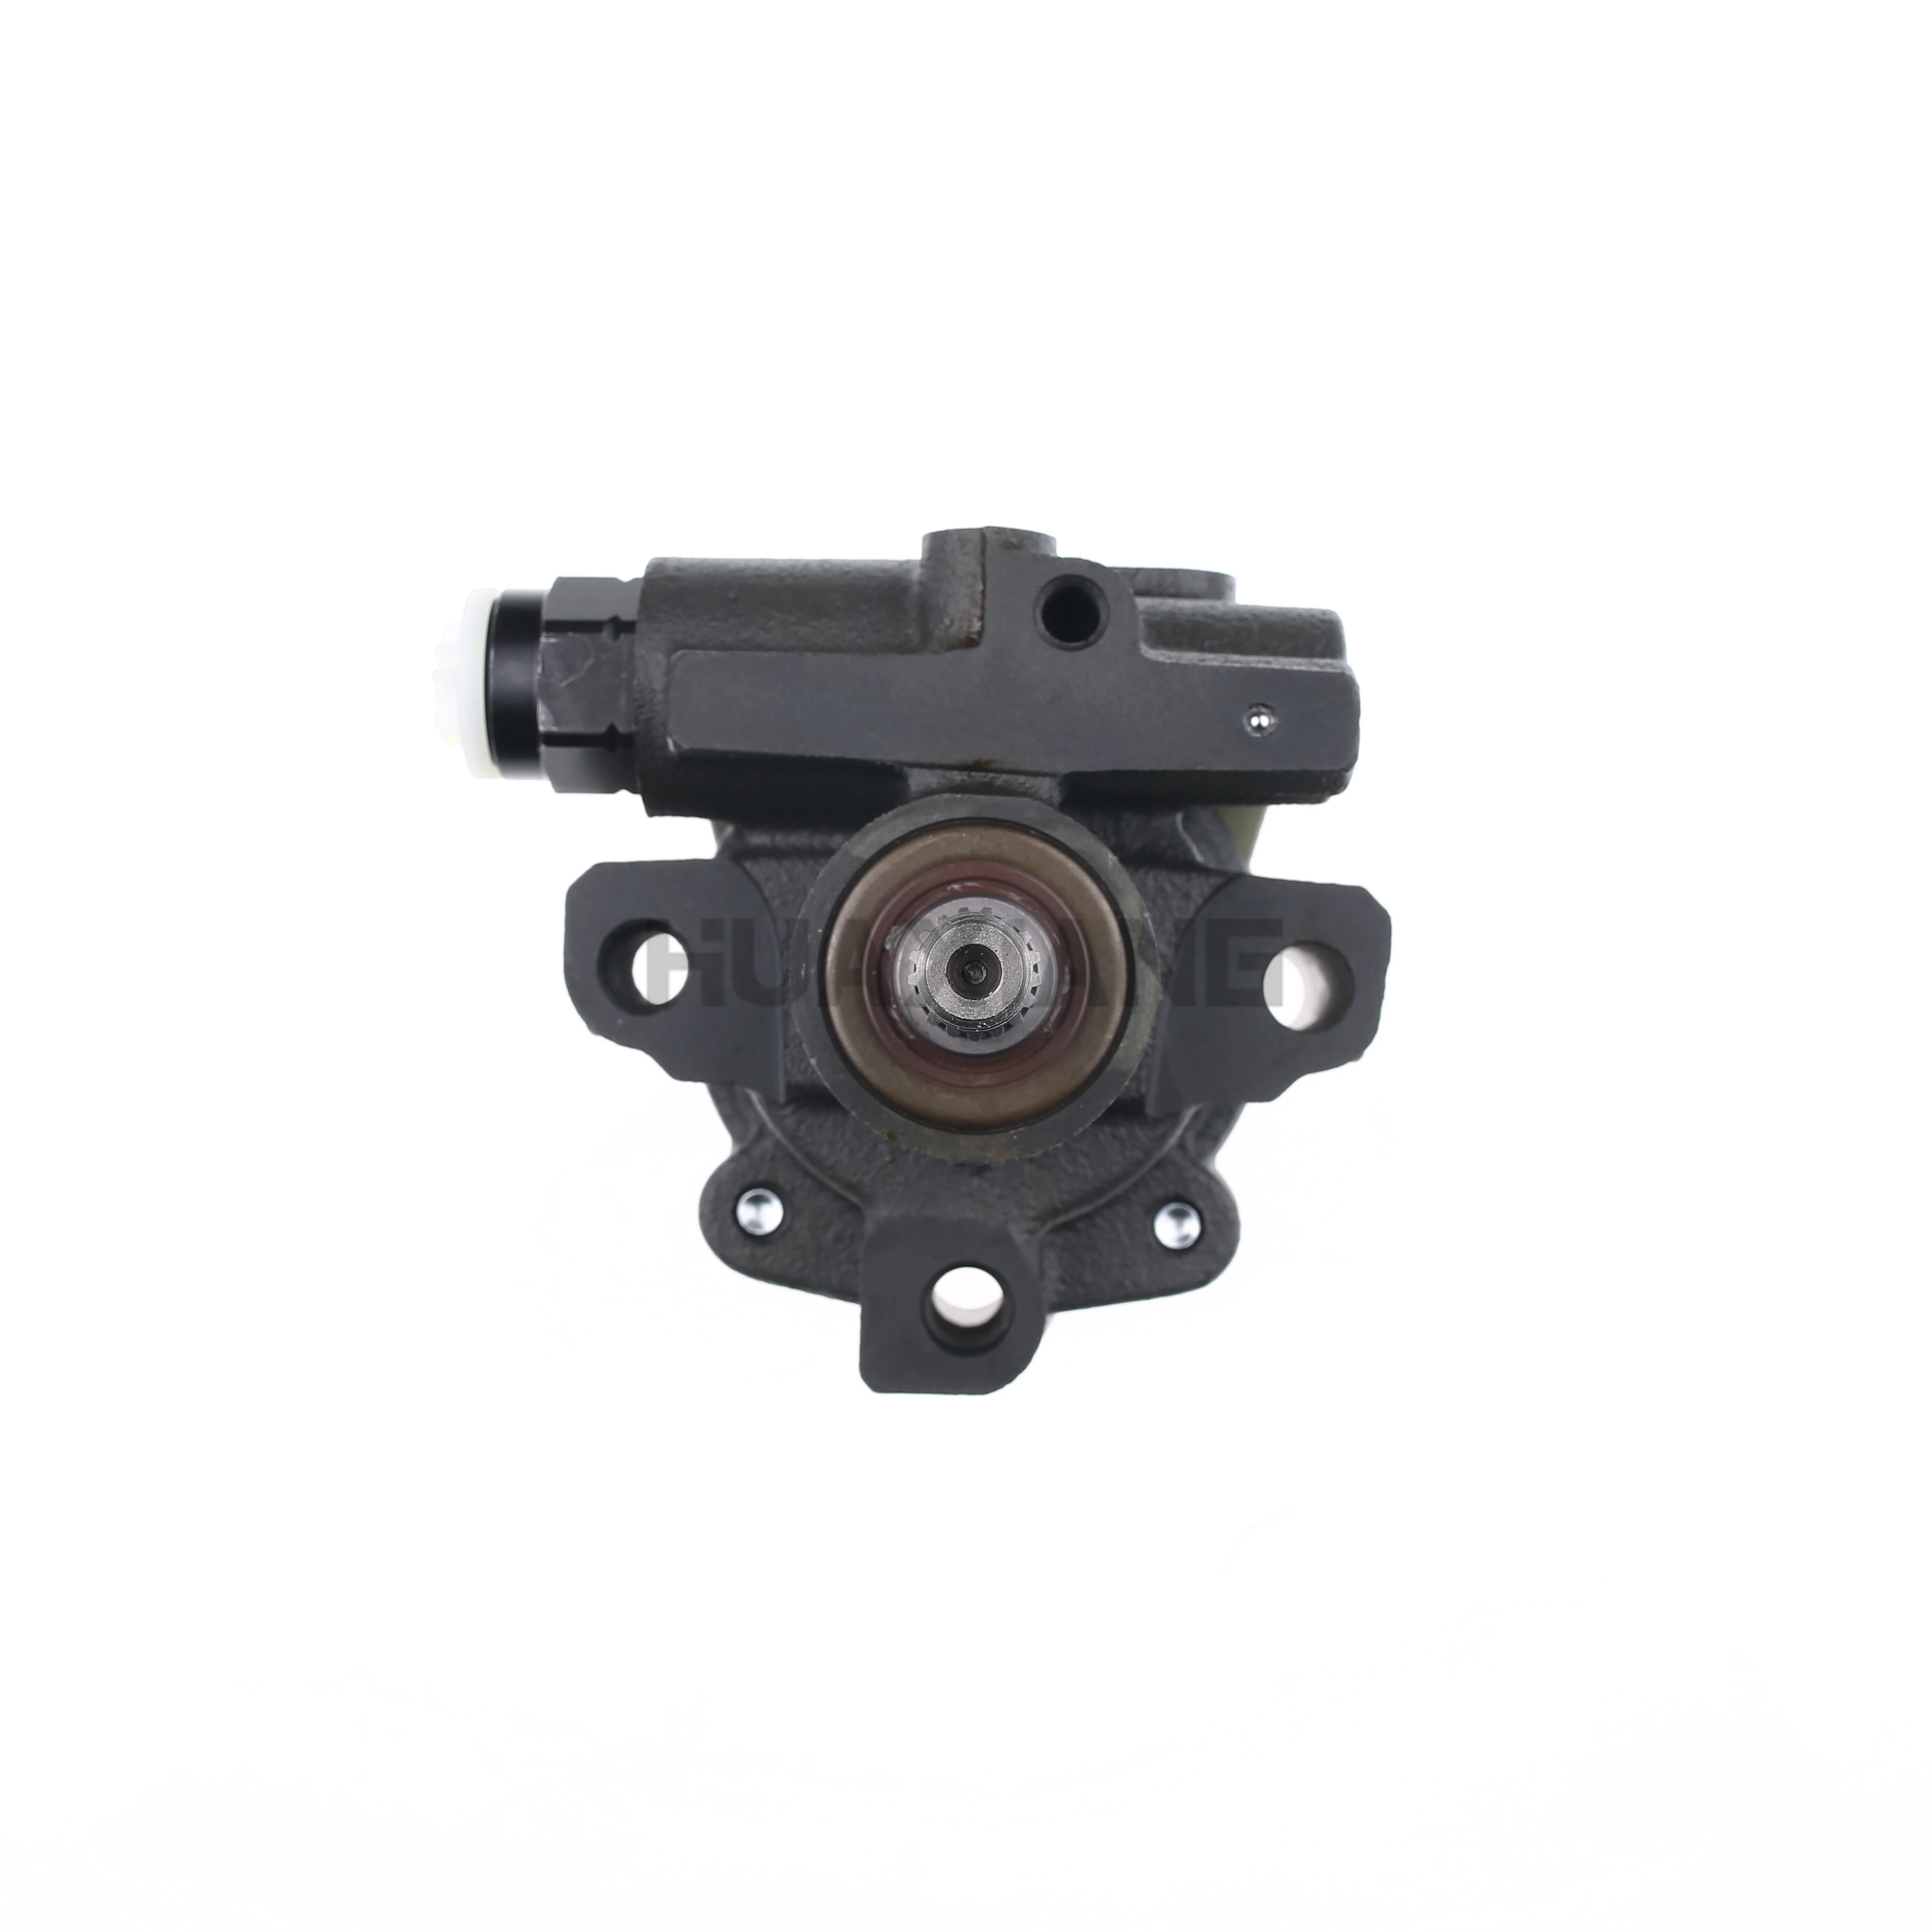 

In-stock CN US CA Brand New Power Steering Pump for Toyota Tacoma 95-04 Pickup 4Runner 215229 4432004051